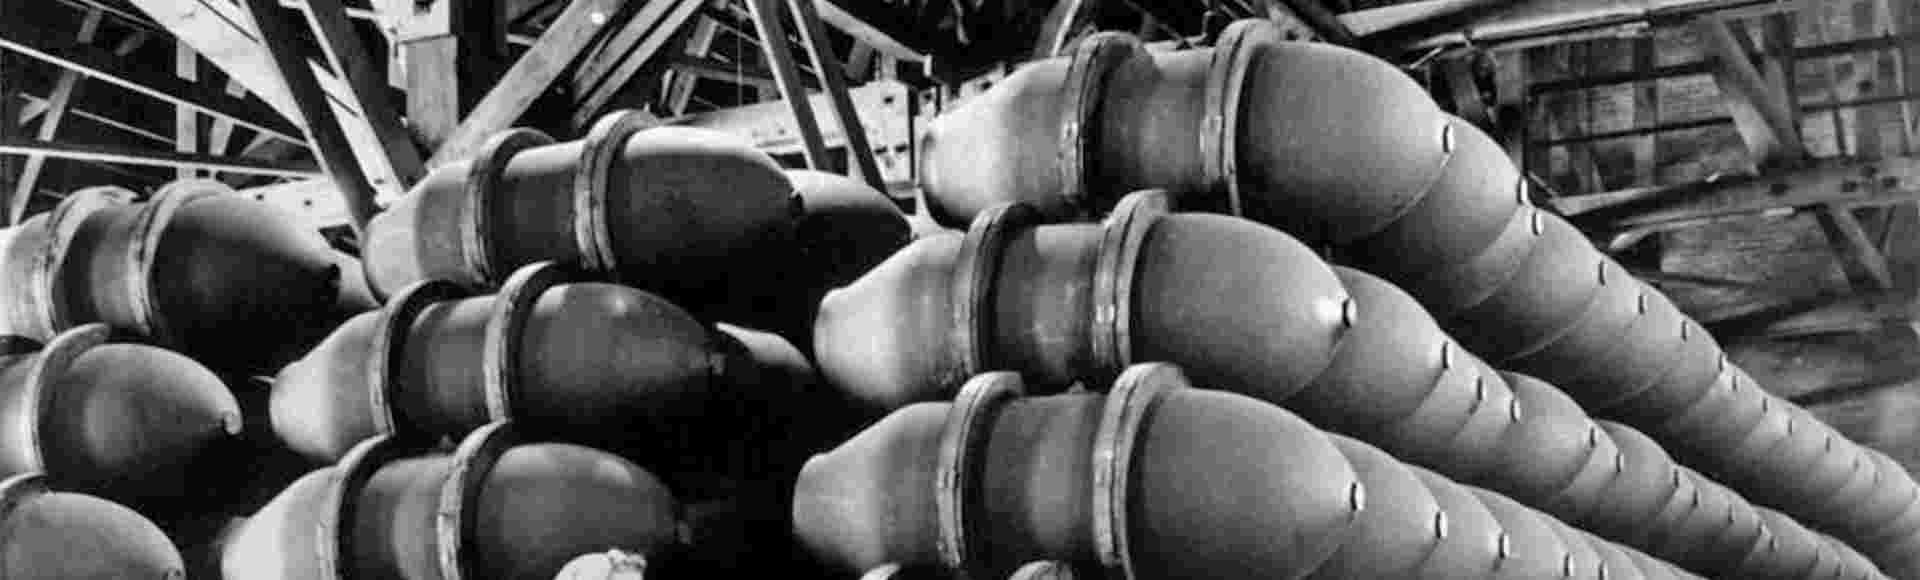 A worker at the US Army Nebraska Ordnance Plant in Omaha, Nebraska, with 1000 lb bomb cases in May 1943.